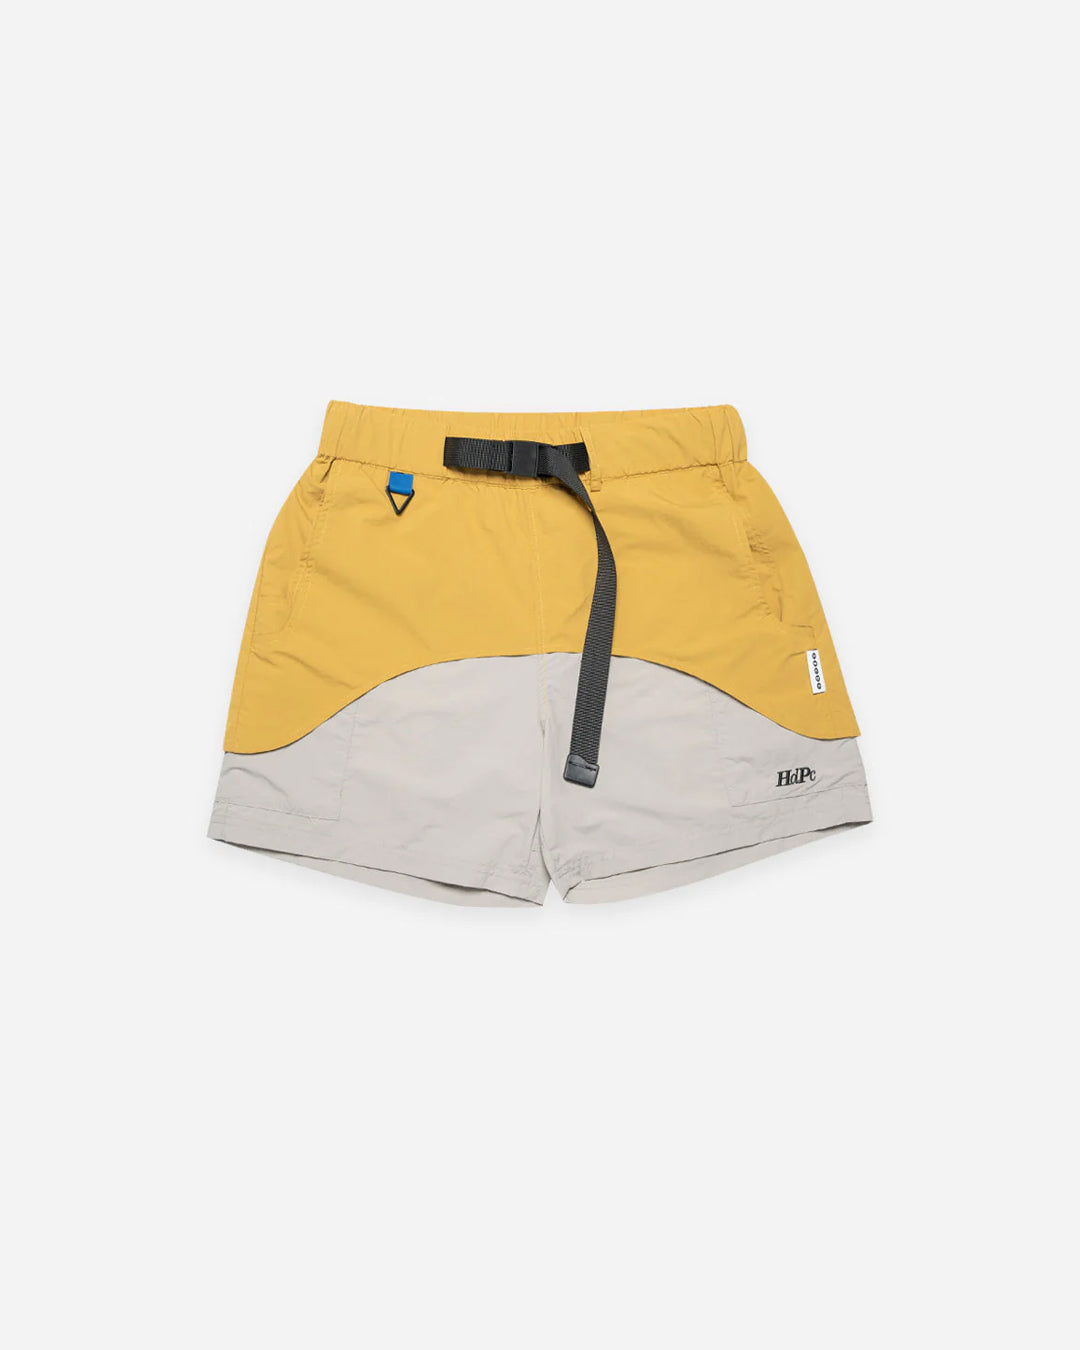 CAMPING WIDE SHORTS BEIGE